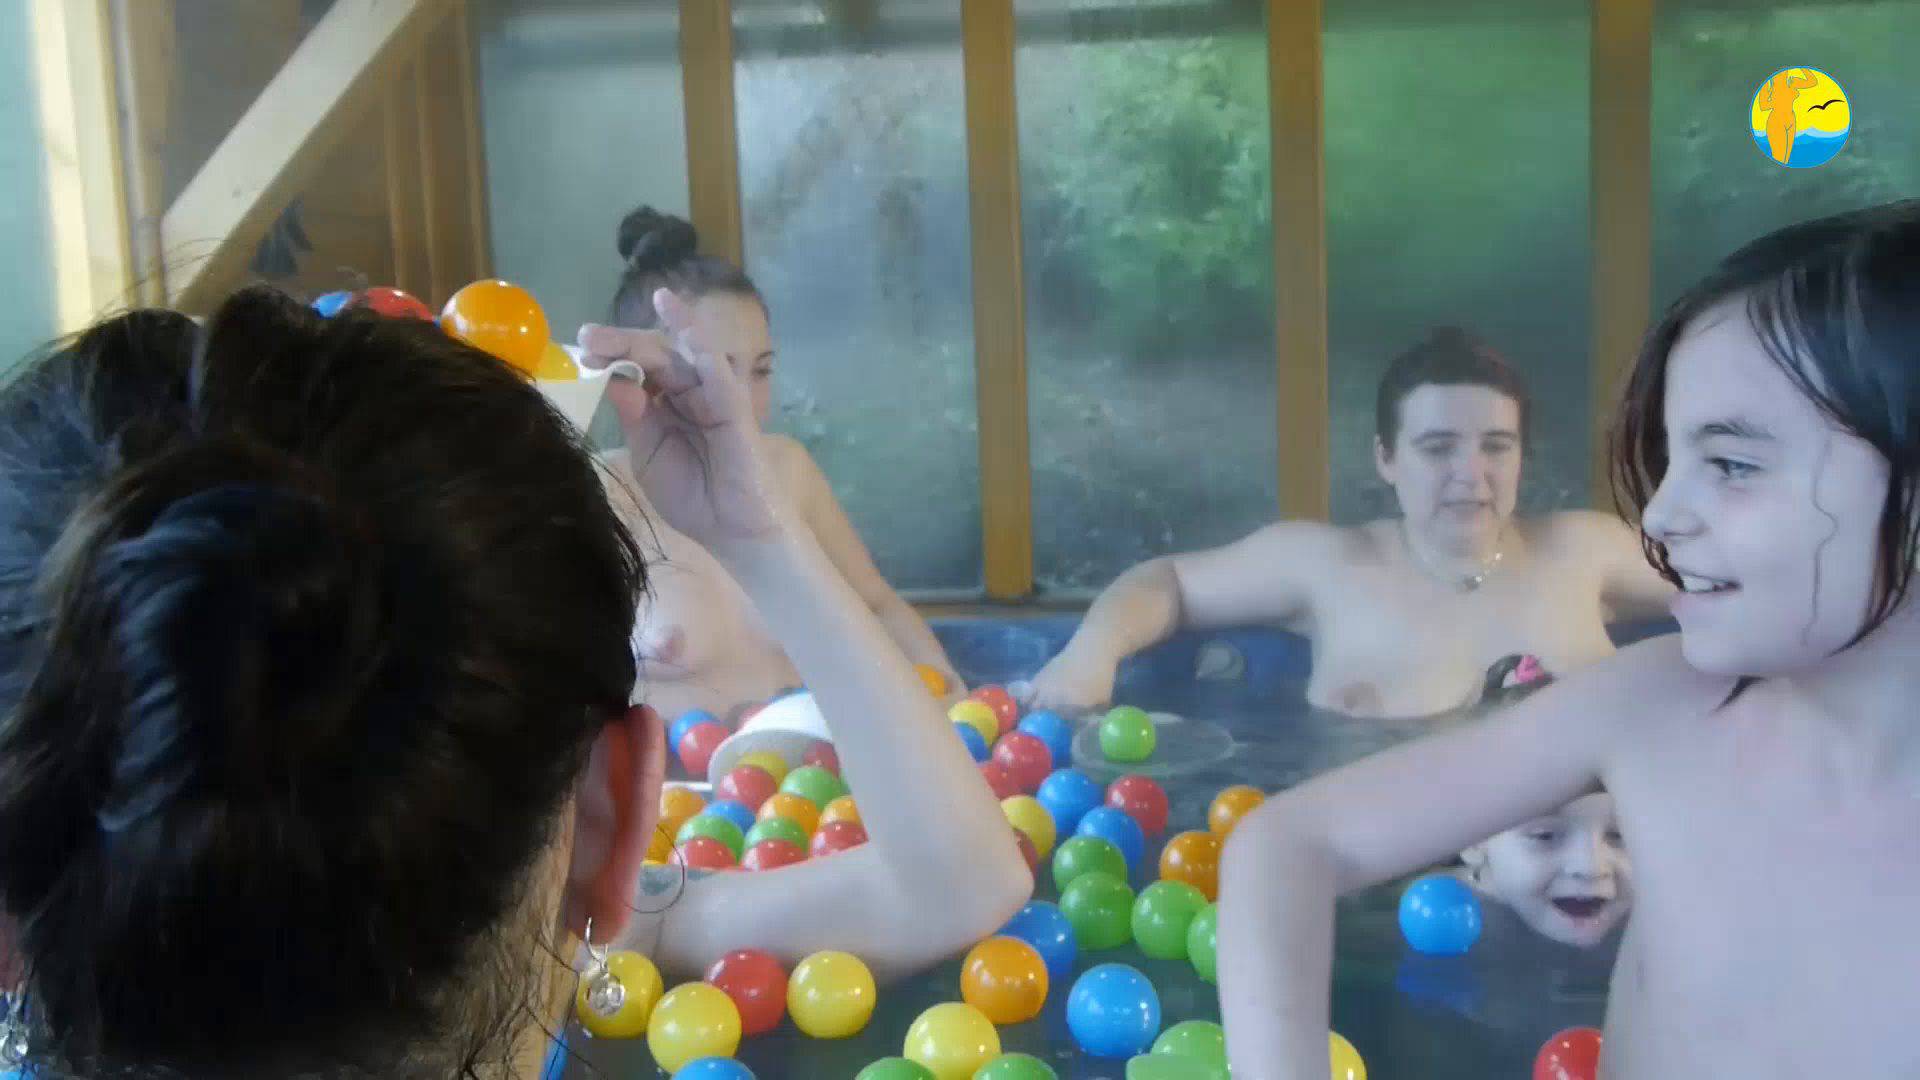 Naturist Freedom Videos Young Cheerful Time Naturists - 2